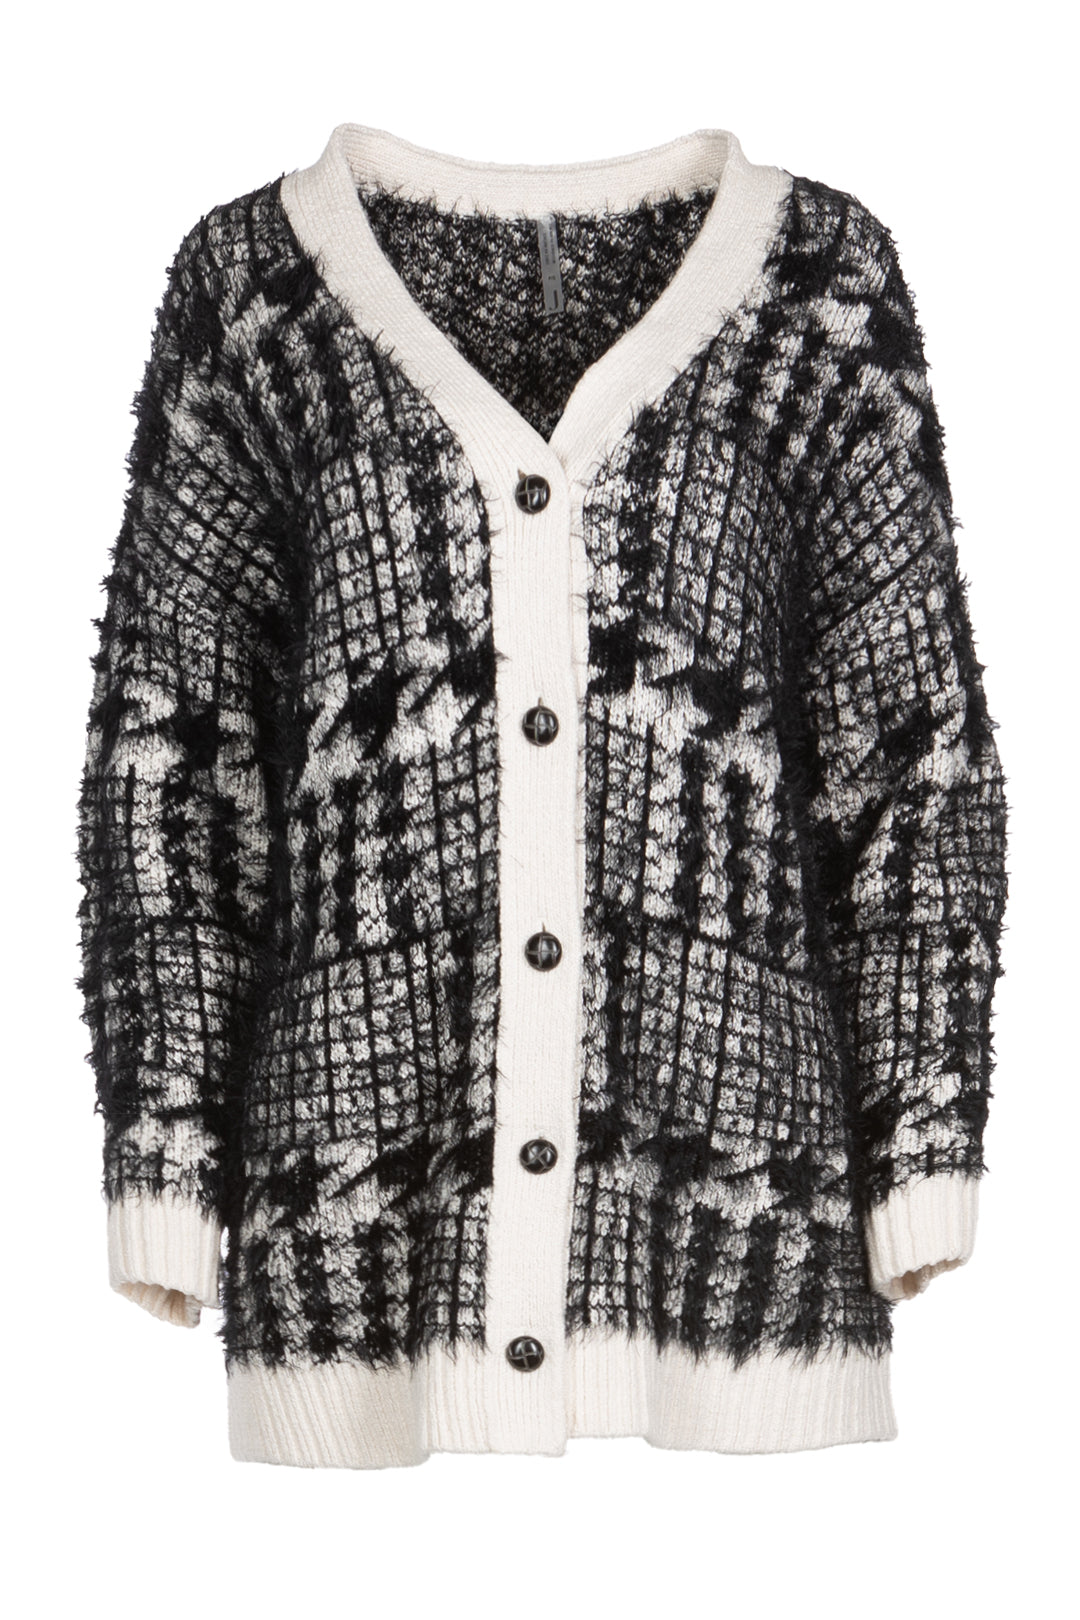 White and black houndstooth cardigan | Cardi